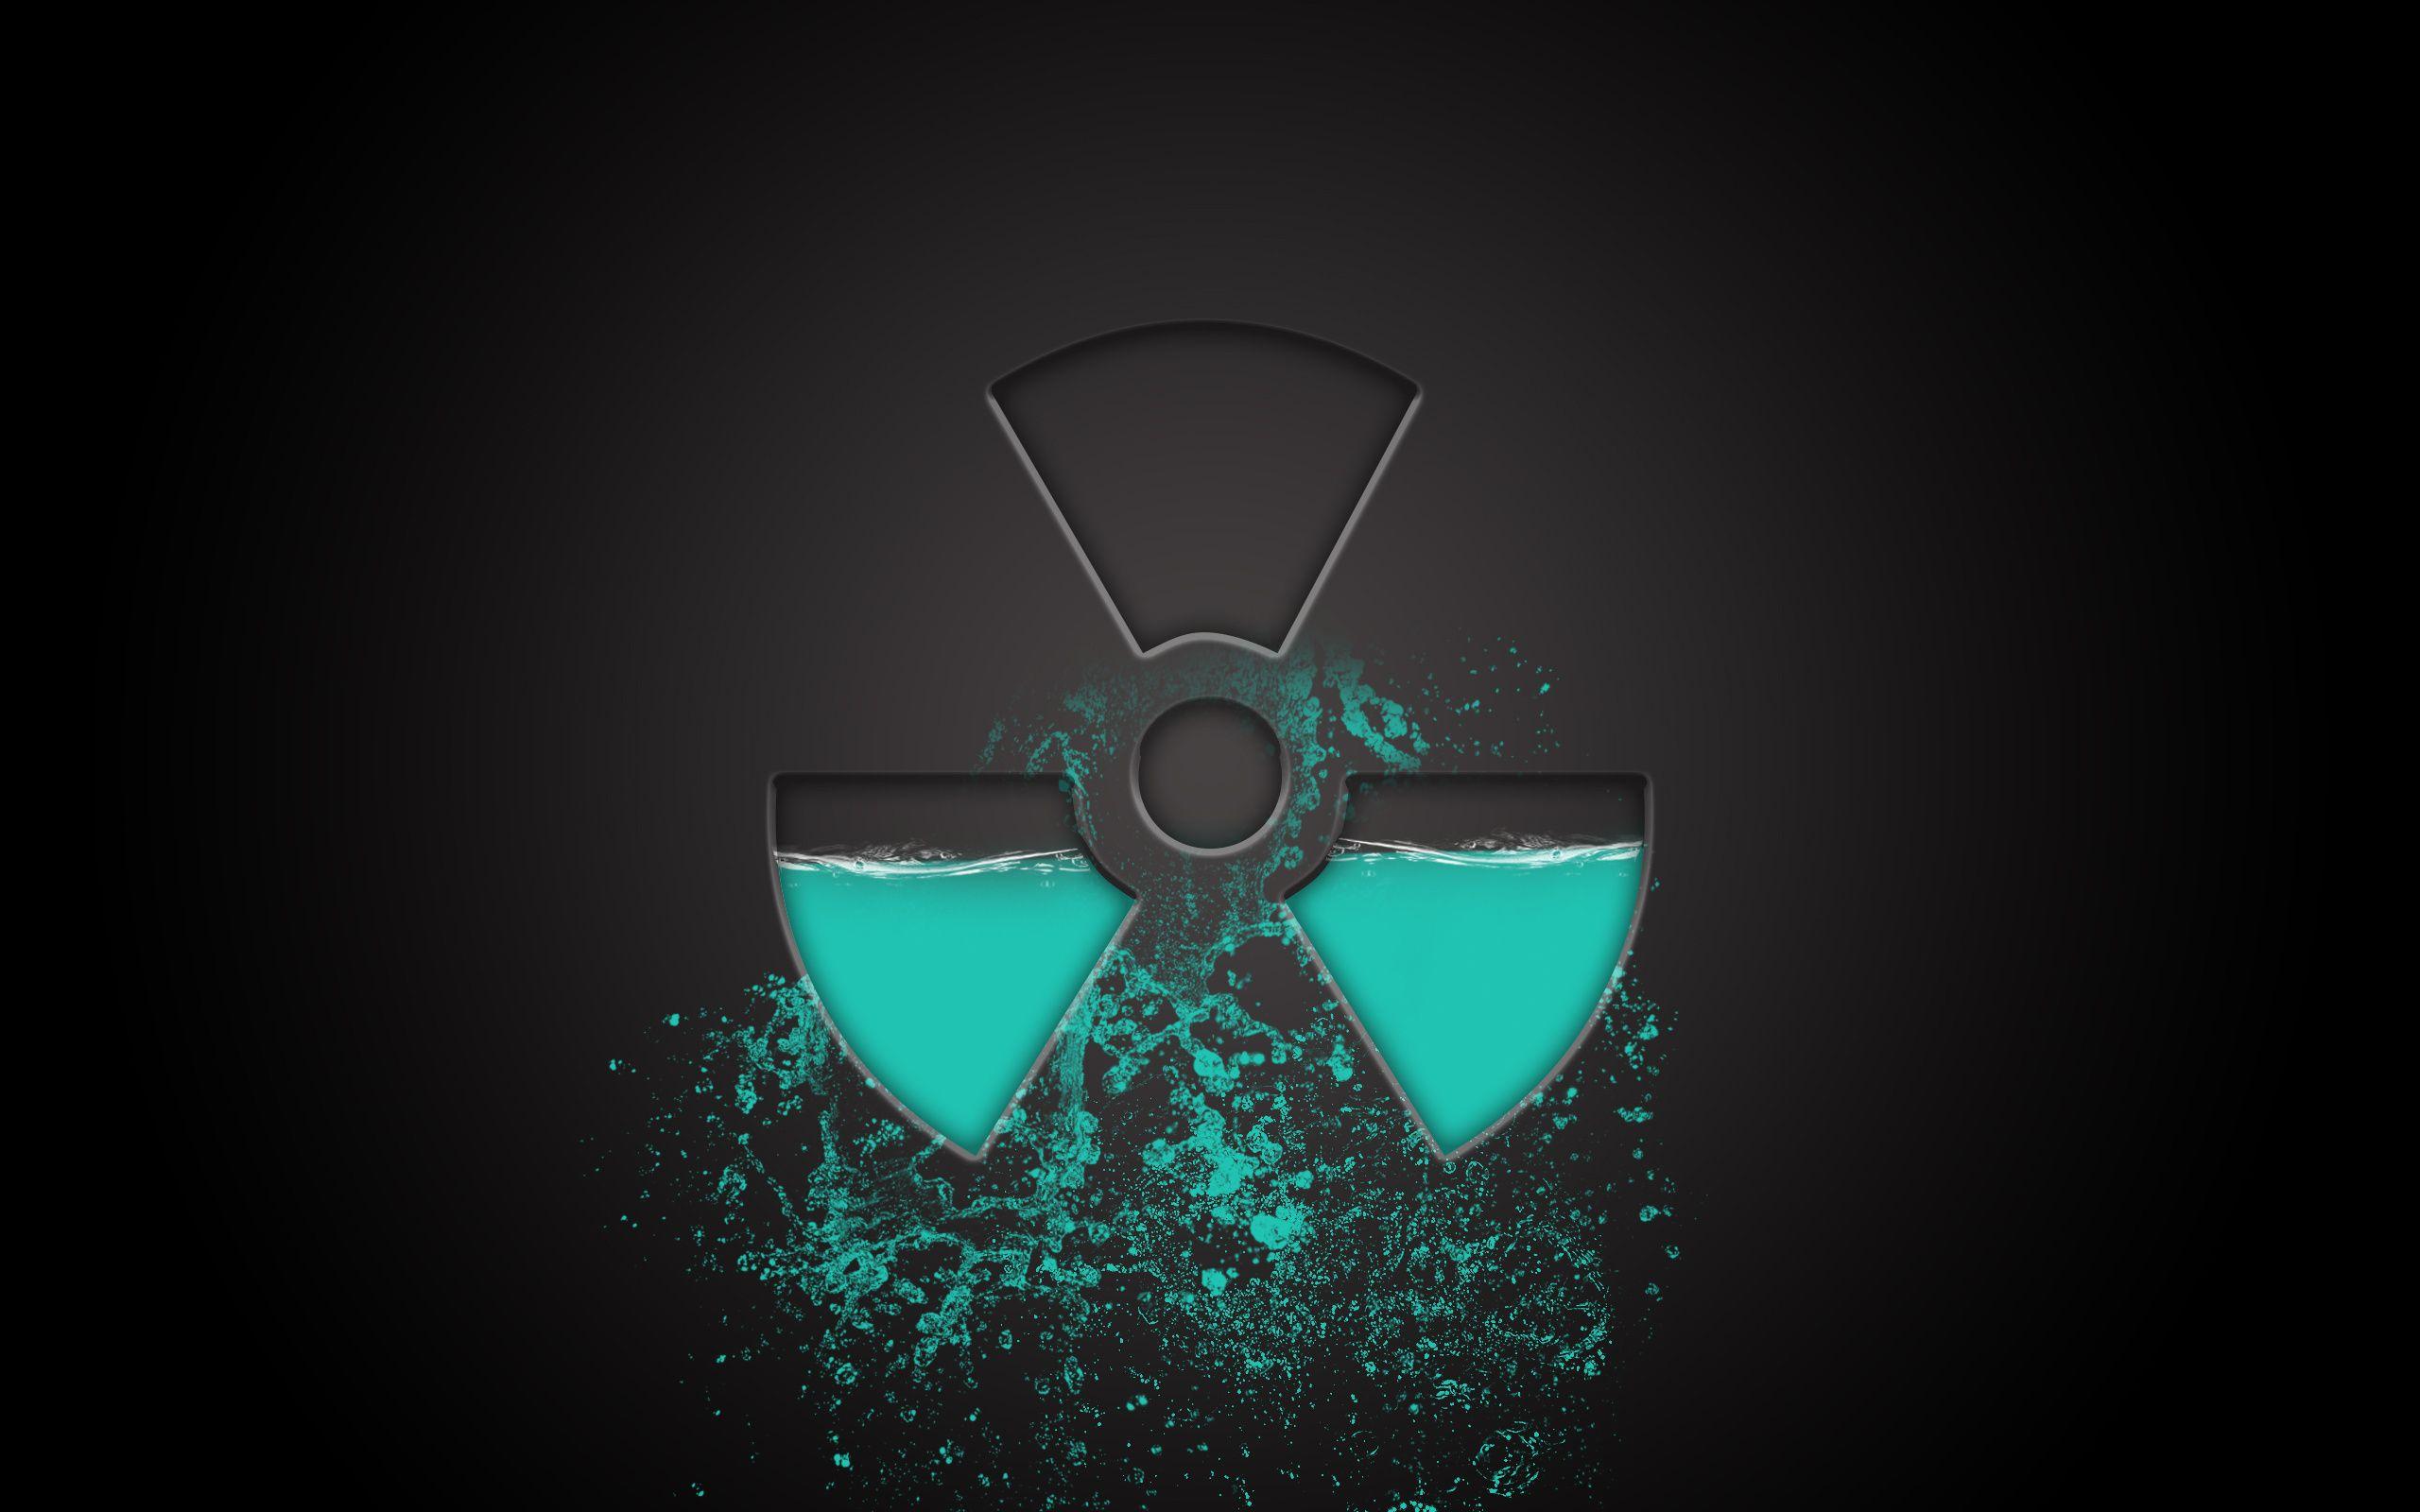 Radioactive Wallpaper by Kelsey Cook on FL. Logos HDQ.82 KB